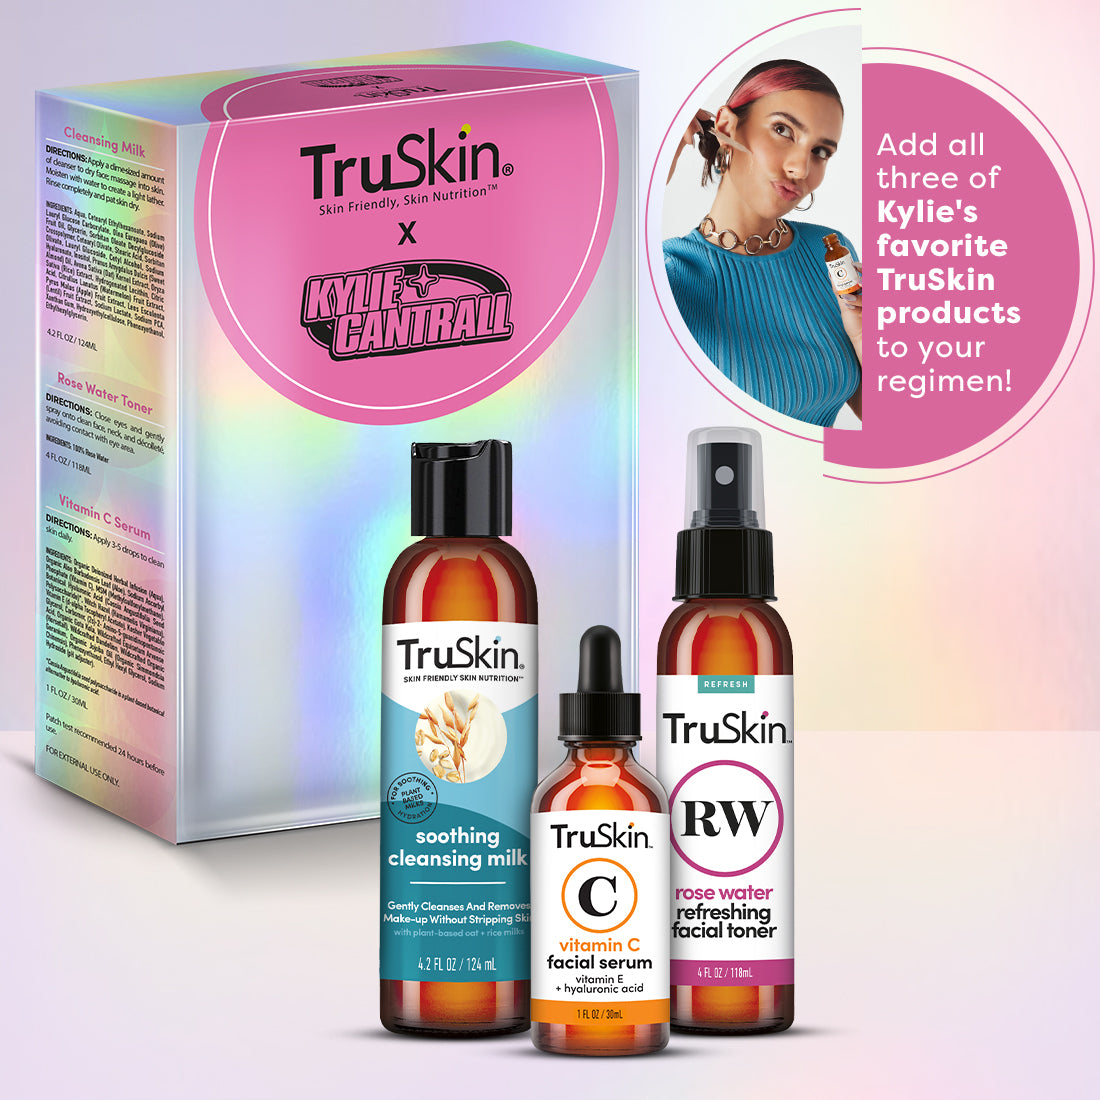 NEW TruSkin.com Exclusive Kylie Bundle by Kylie Cantrall